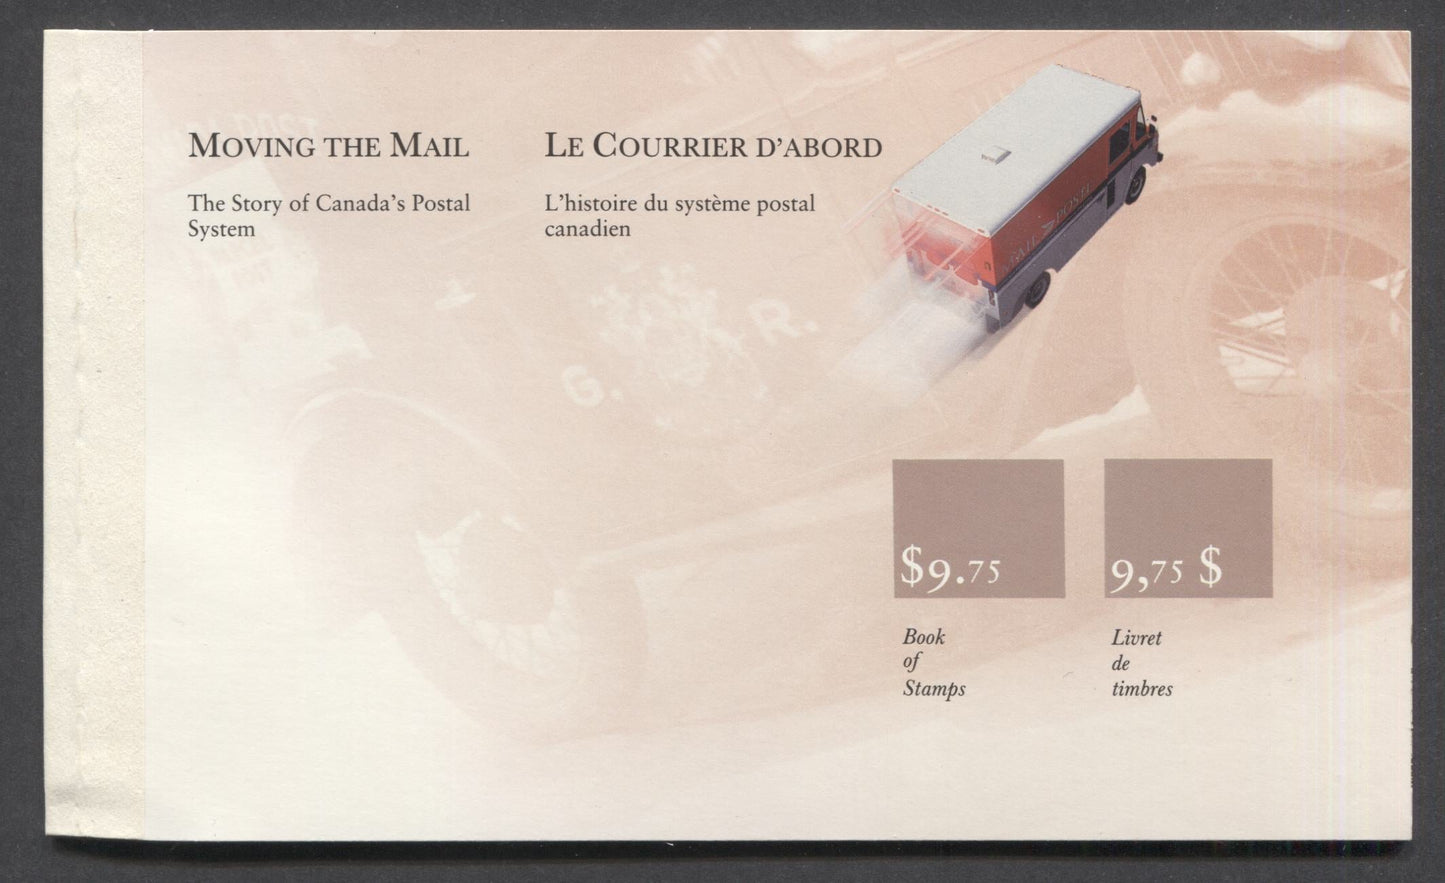 Lot 91 Canada #BK118 39c Multicolored Mail Van, 1990 Moving The Mail Issue, A VFNH Prestige Booklet Of 25 With MF Cover & DF/DF Panes